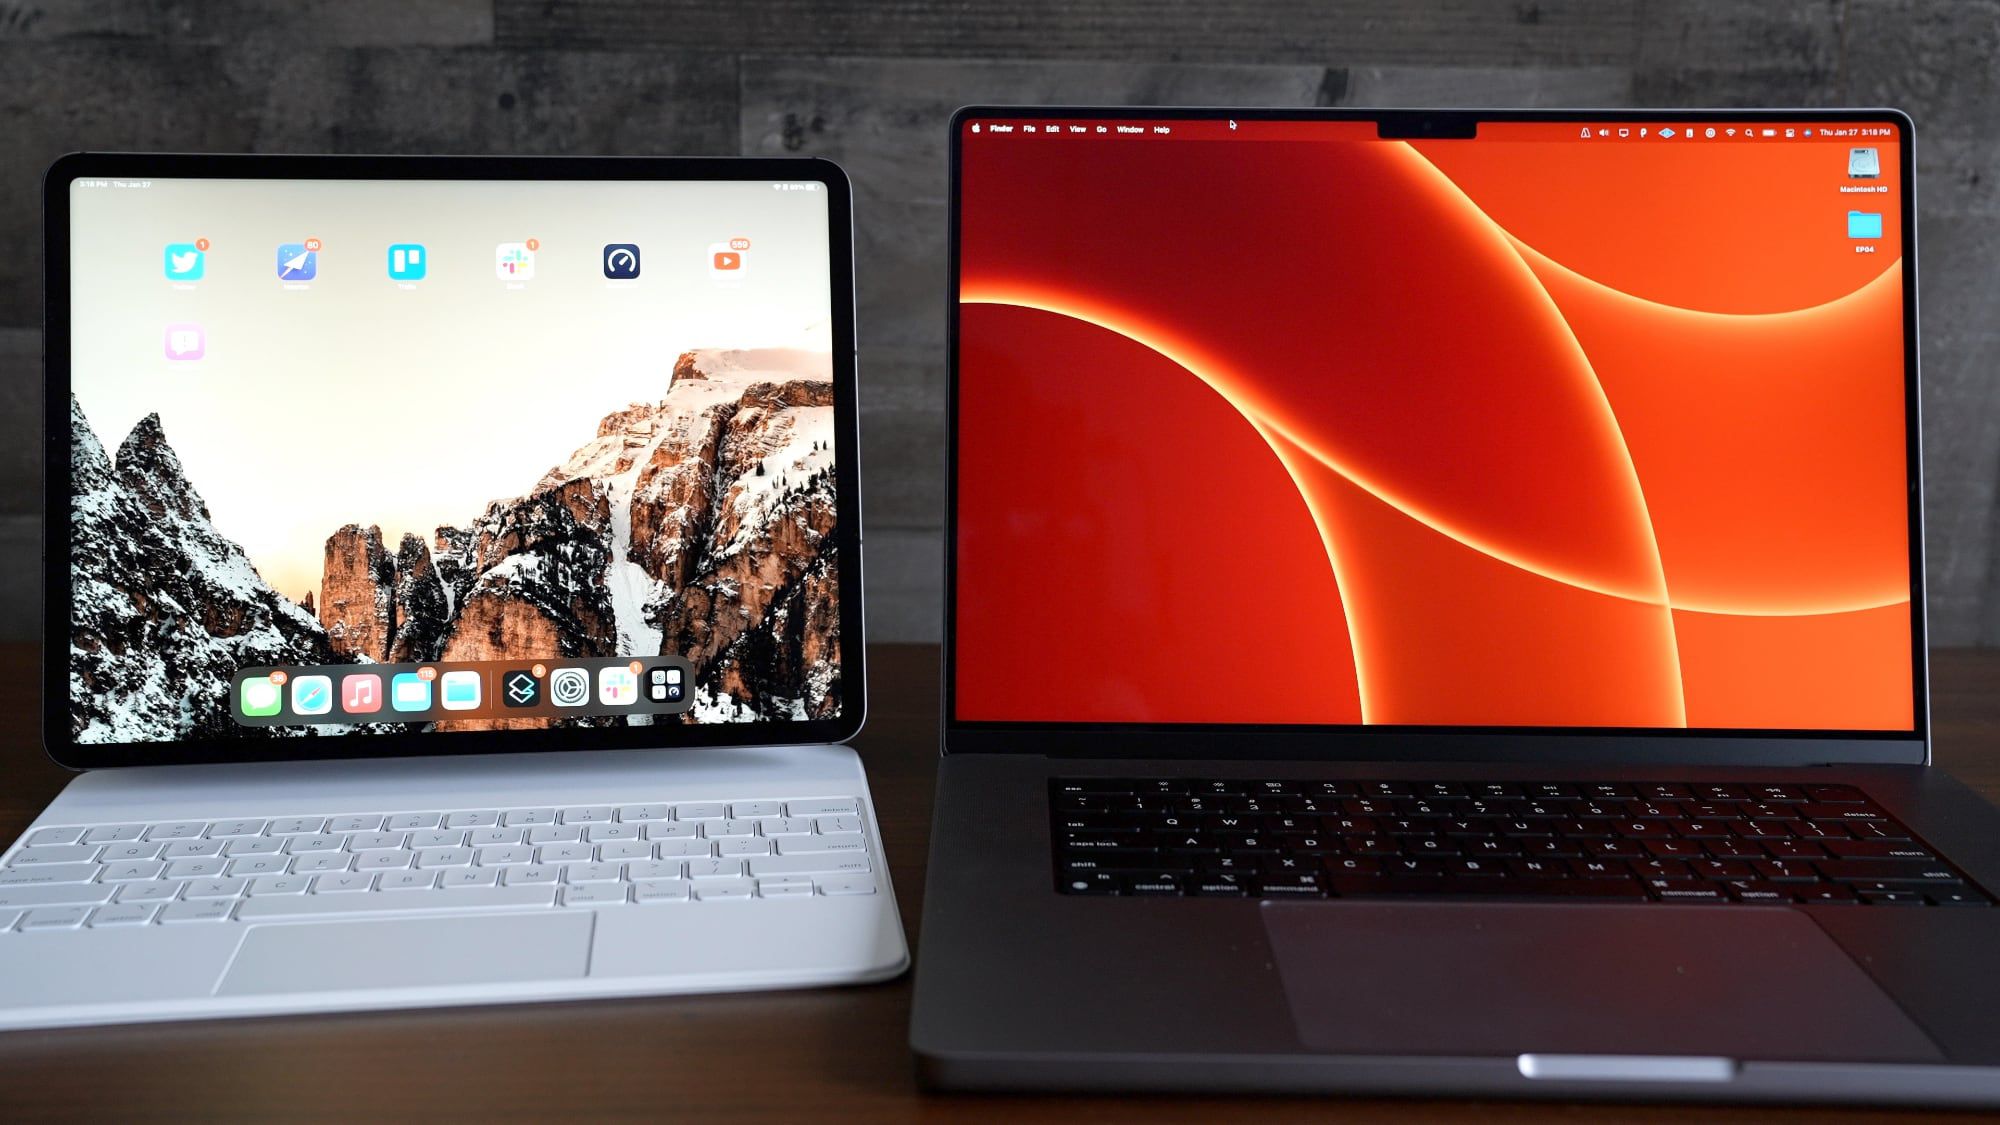 Hands-On With Universal Control in iPadOS 15.4 and macOS Monterey 12.3 - MacRumors : Apple today released new developer betas of iPadOS 15.4 and macOS Monterey 12.3, and the updated software adds the long awaited and highly...  | Tranquility 國際社群